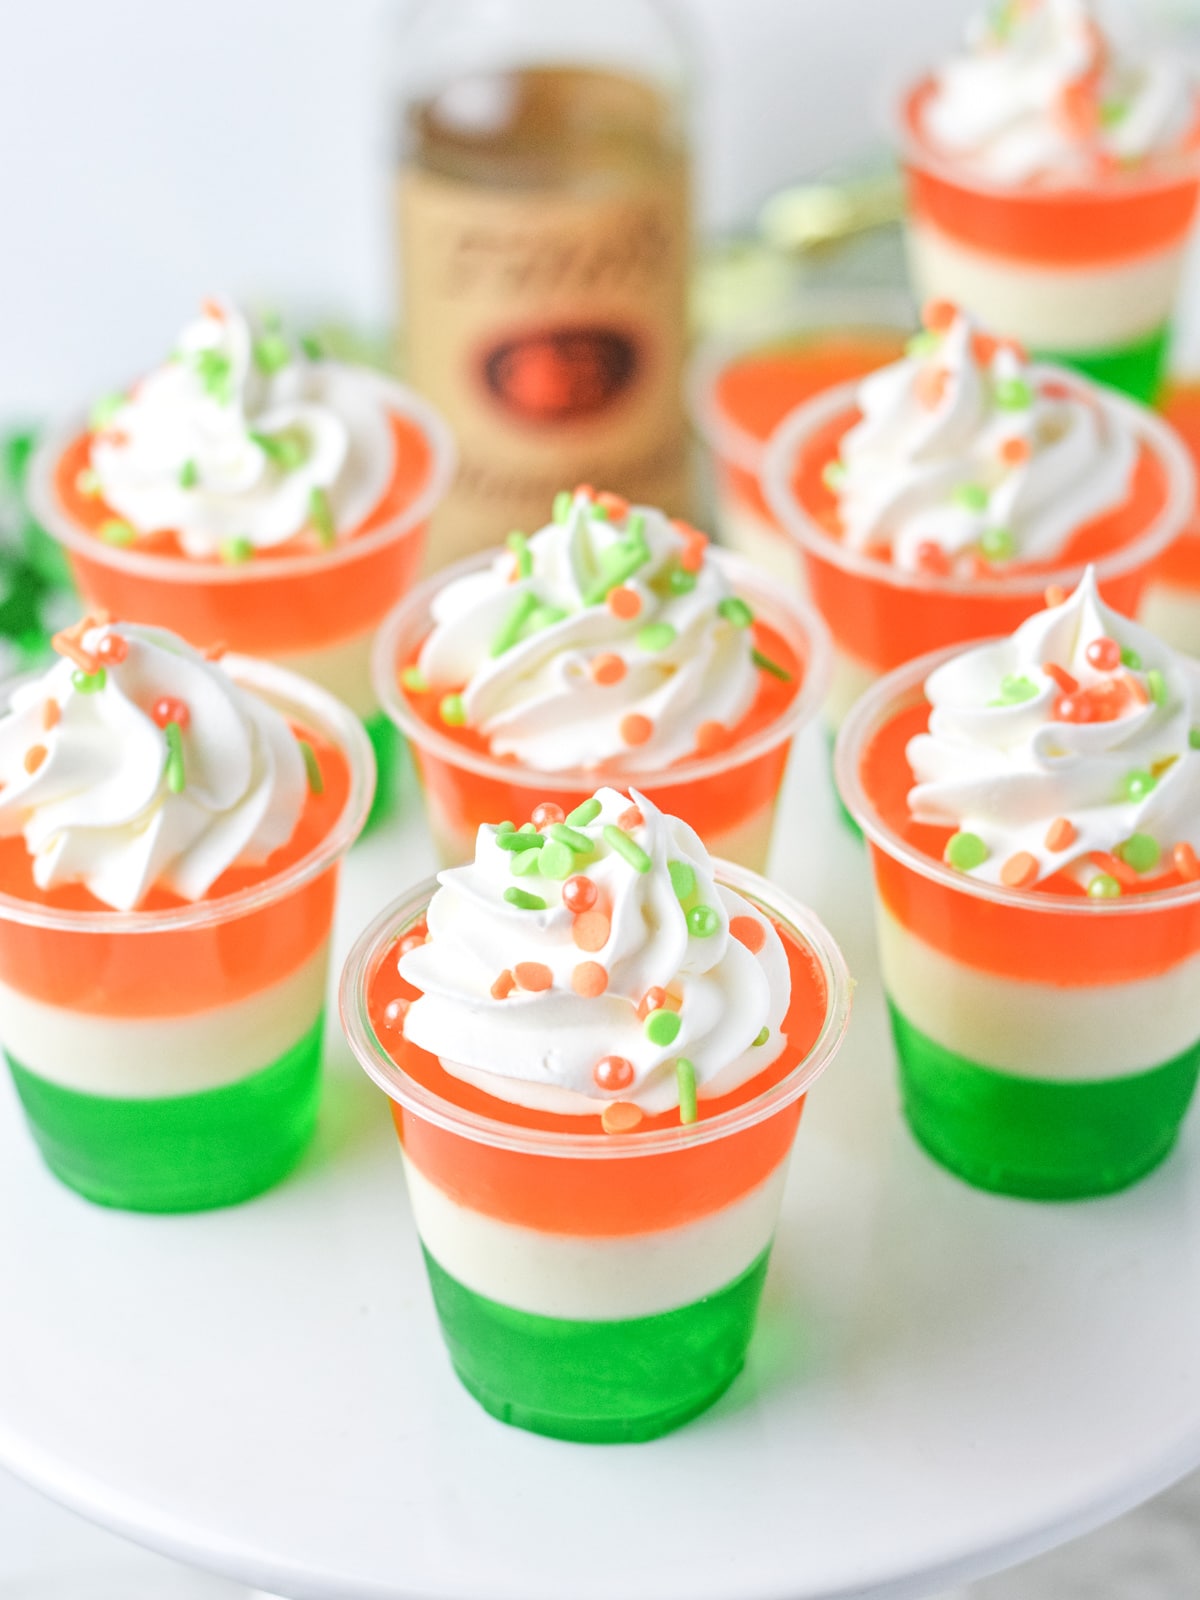 Irish Flag Jello Shots with whipped cream and sprinkles one serving tray